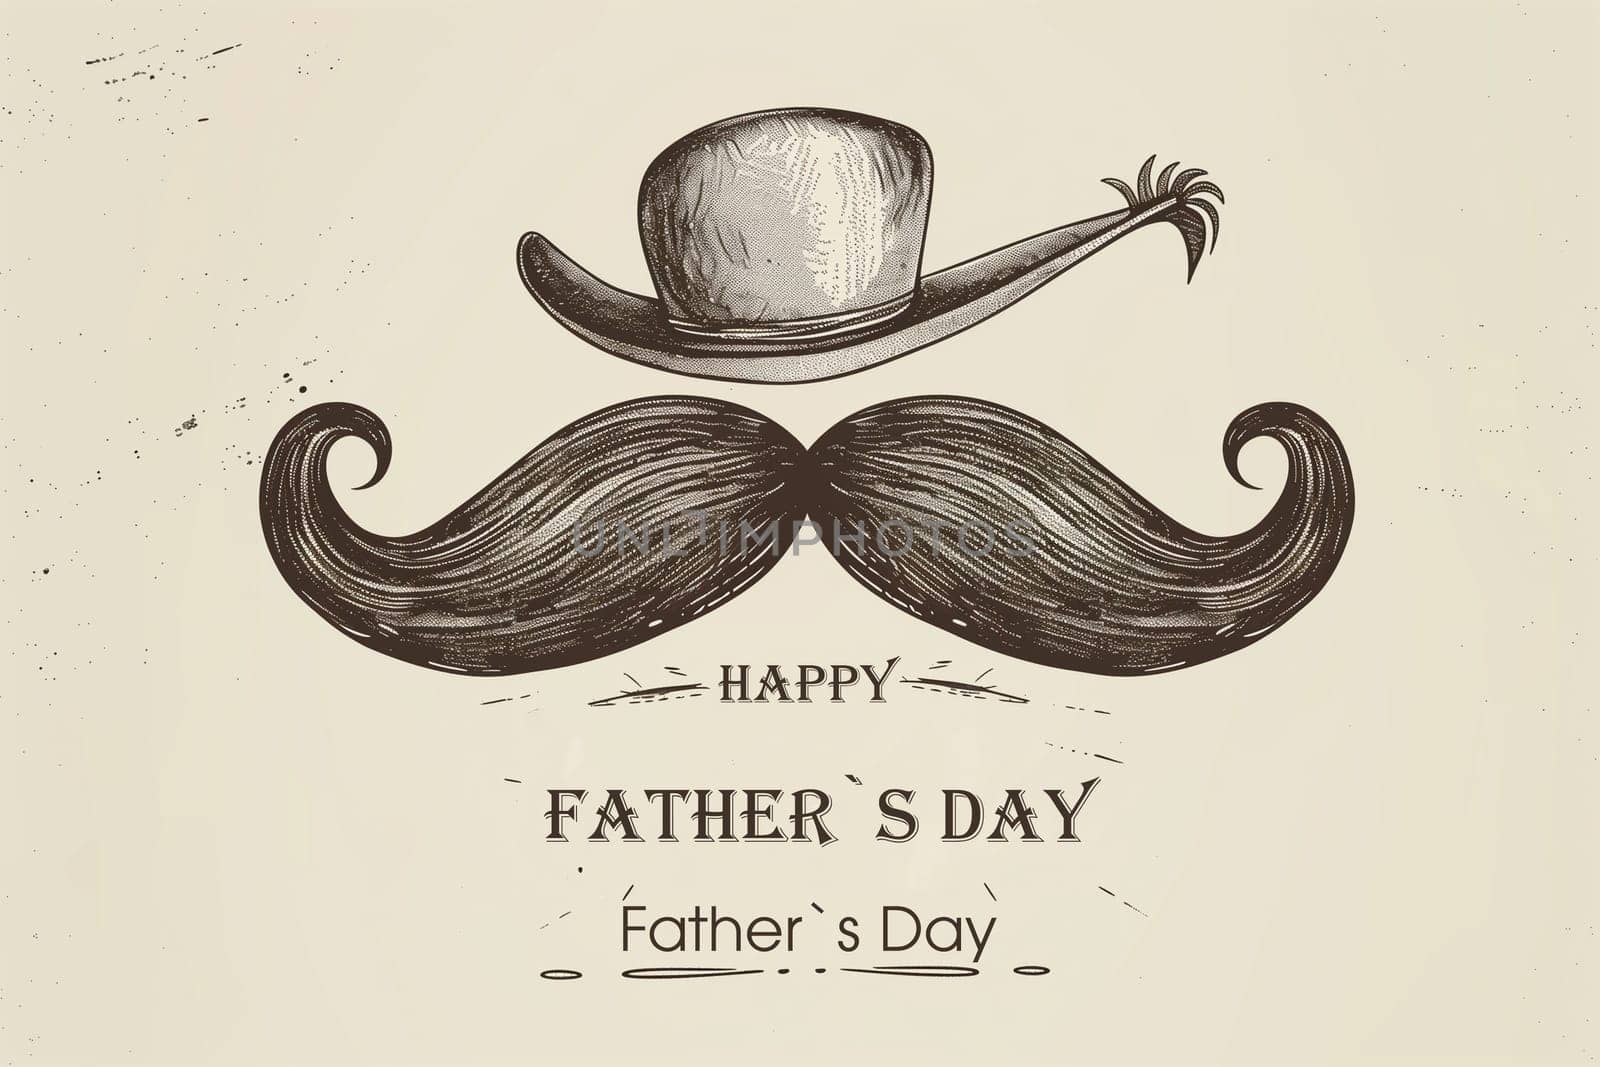 Fathers Day Card With Mustache and Top Hat by Sd28DimoN_1976